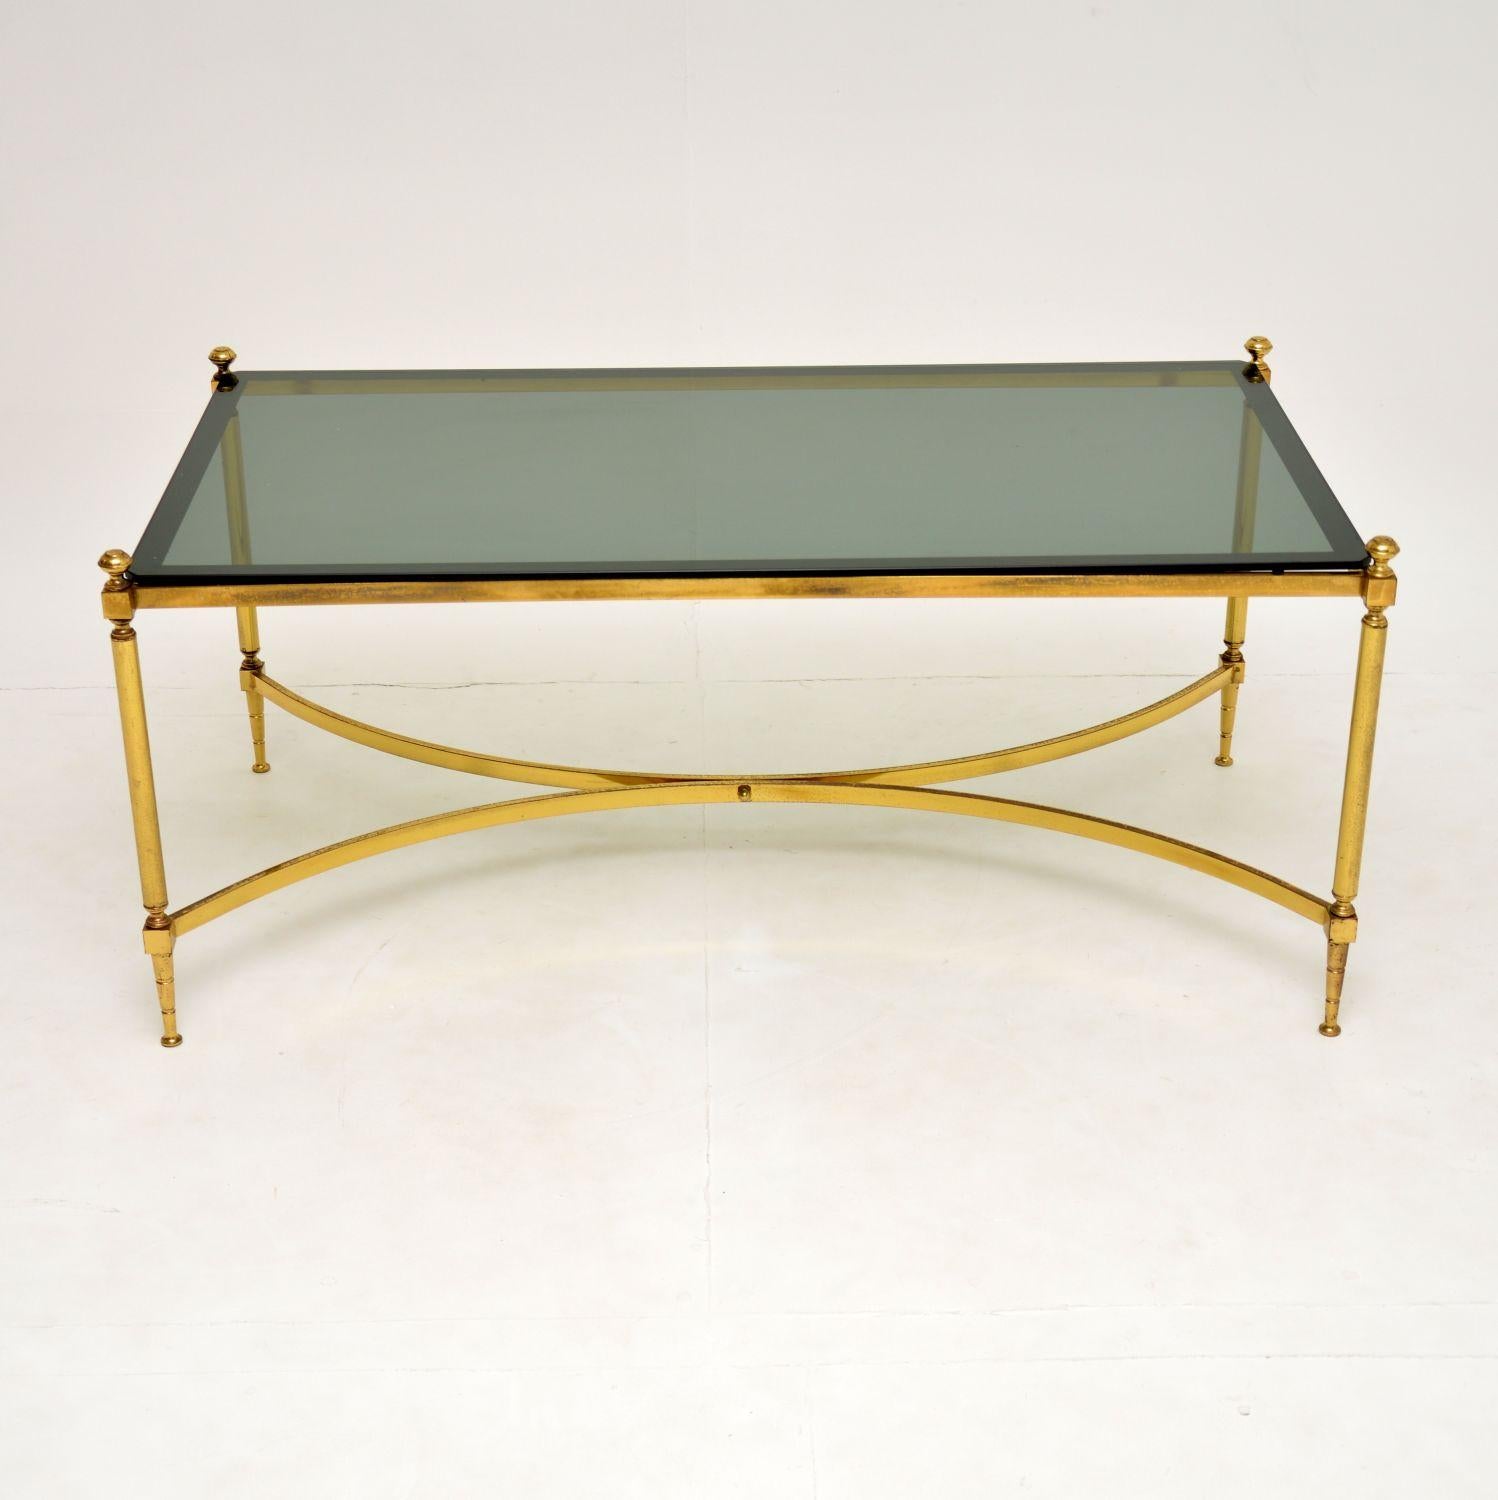 A stunning and quite large vintage coffee table made in Italy, this dates from the 1960s. It is of excellent quality and in lovely original condition.

There is some light surface wear here and there, nothing too noticeable, mostly just some